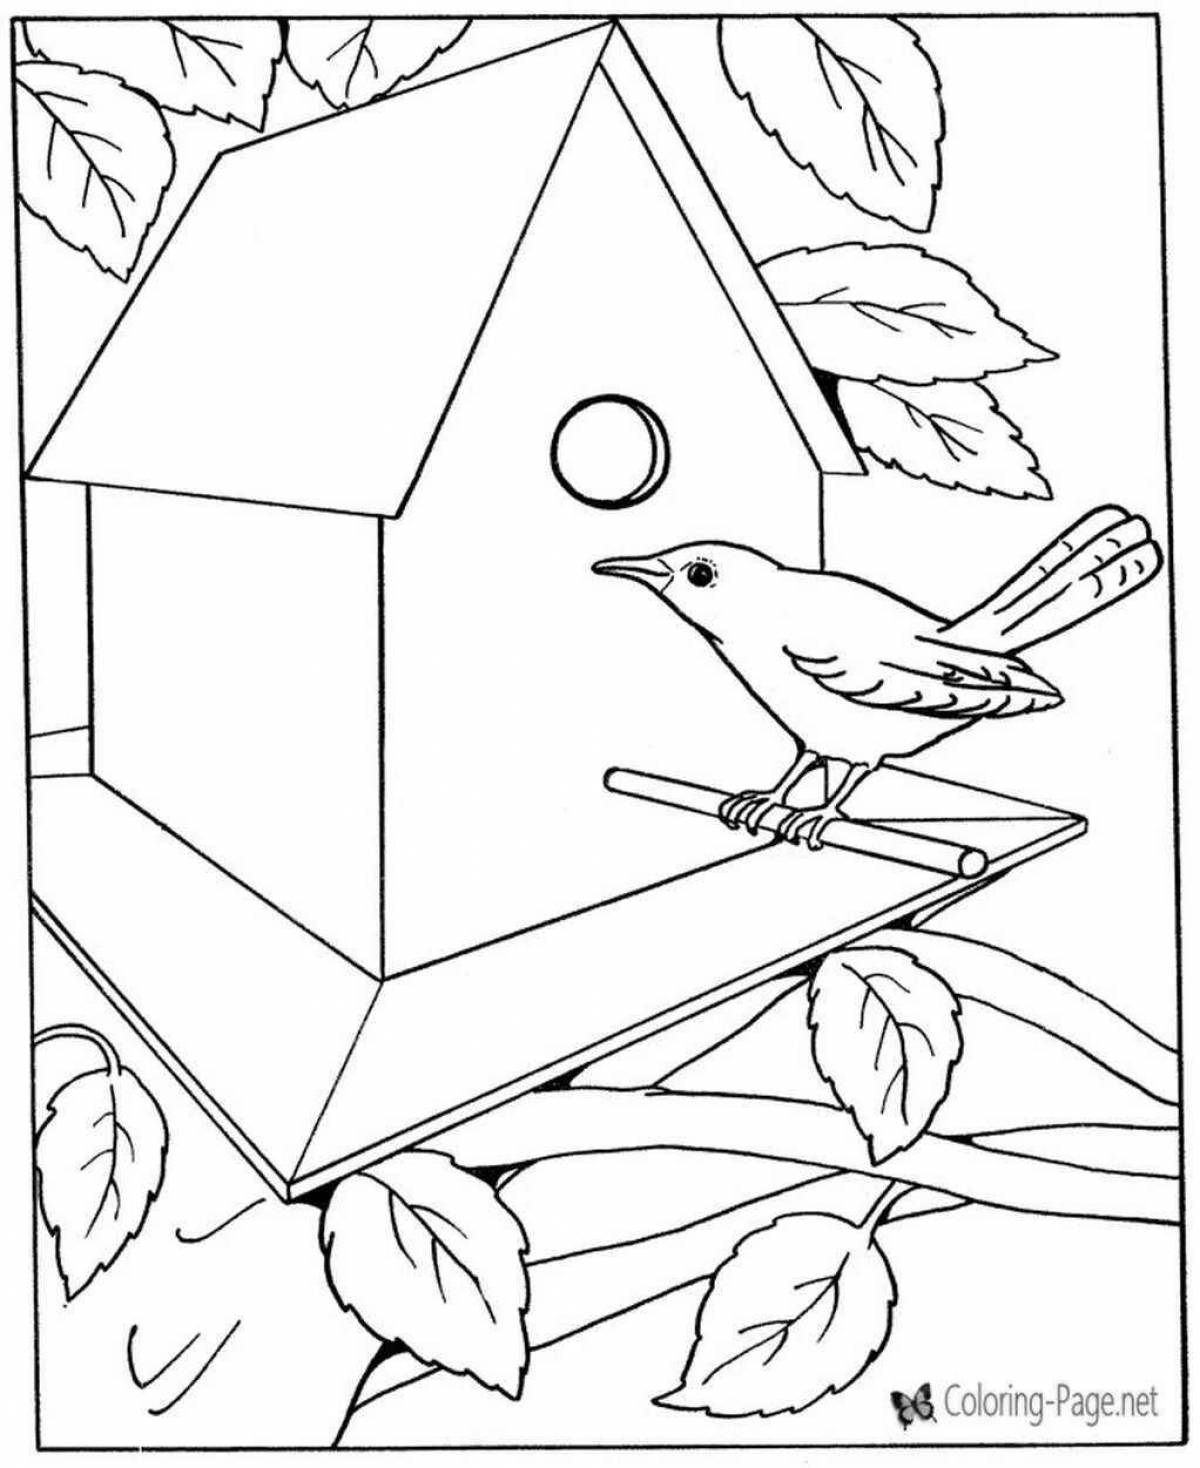 Cute birdhouse coloring book for 3-4 year olds